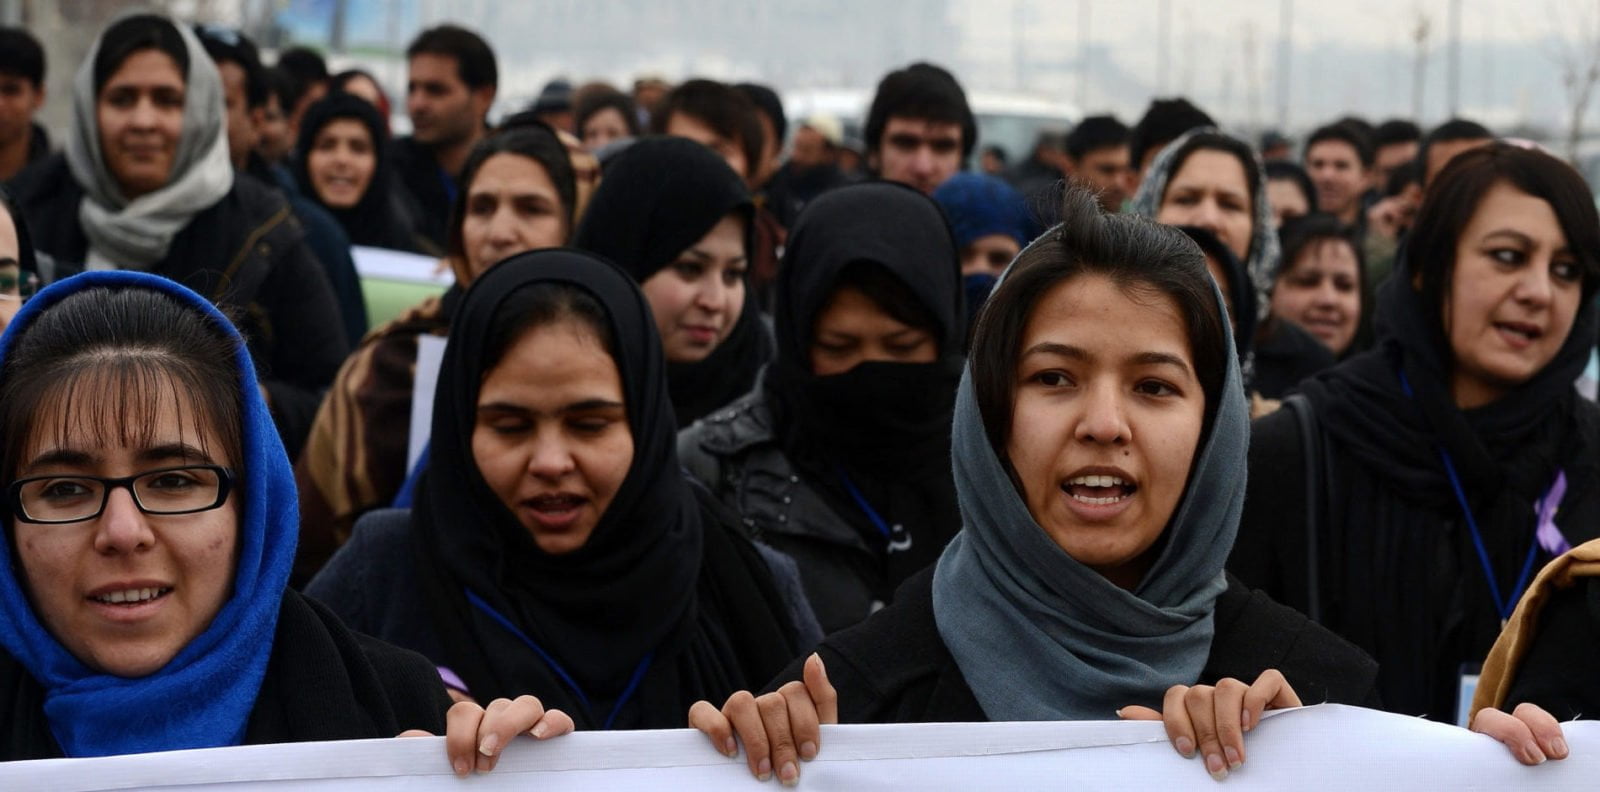 Protesters call for an end to violence against women in Afghanistan. © AFP / SHAH MARAI